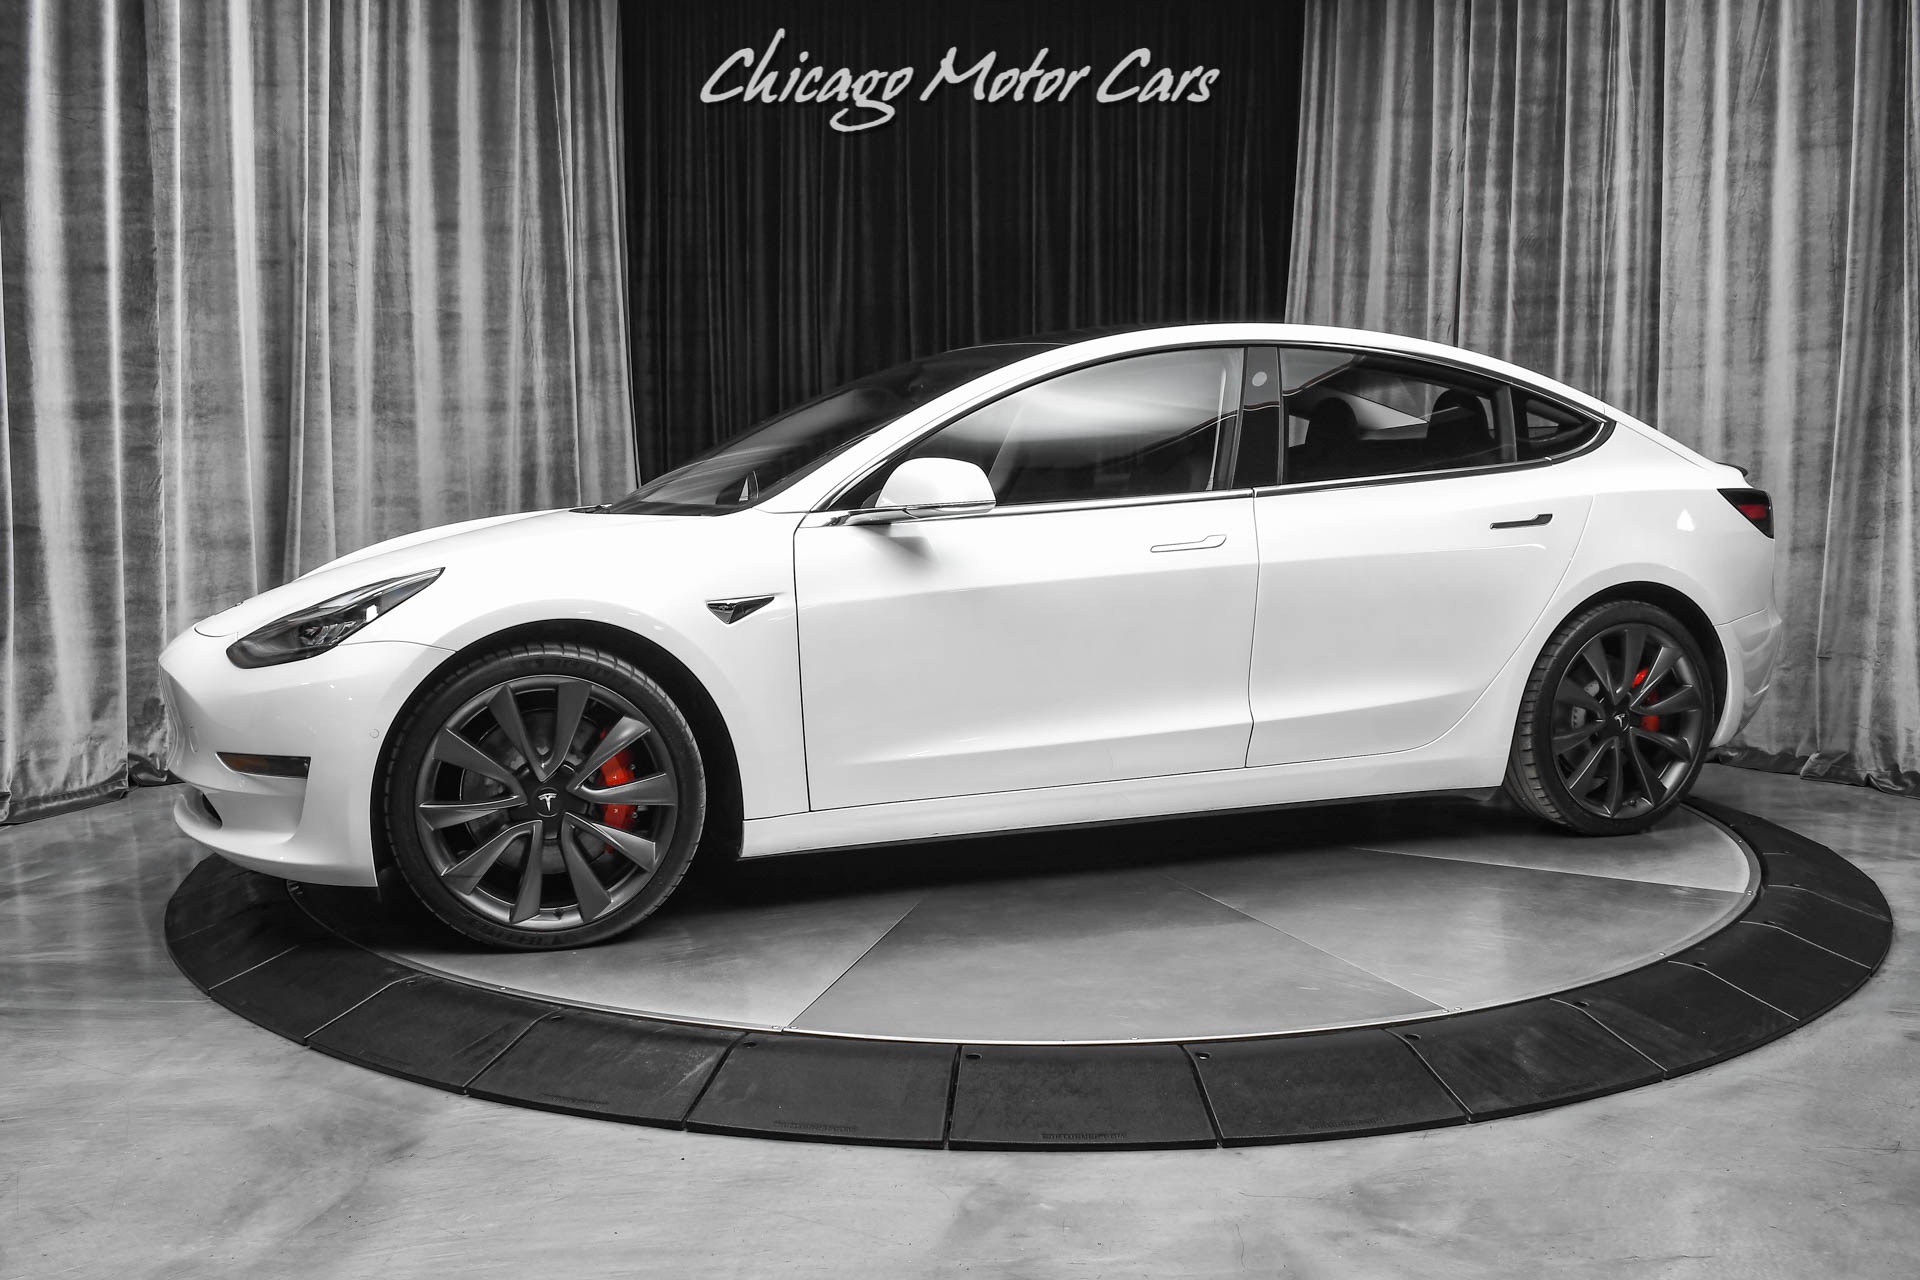 Used 2020 Tesla Model 3 Performance Sedan Full Self Driving LOADED  Performance Wheels! For Sale (Special Pricing) | Chicago Motor Cars Stock  #19109